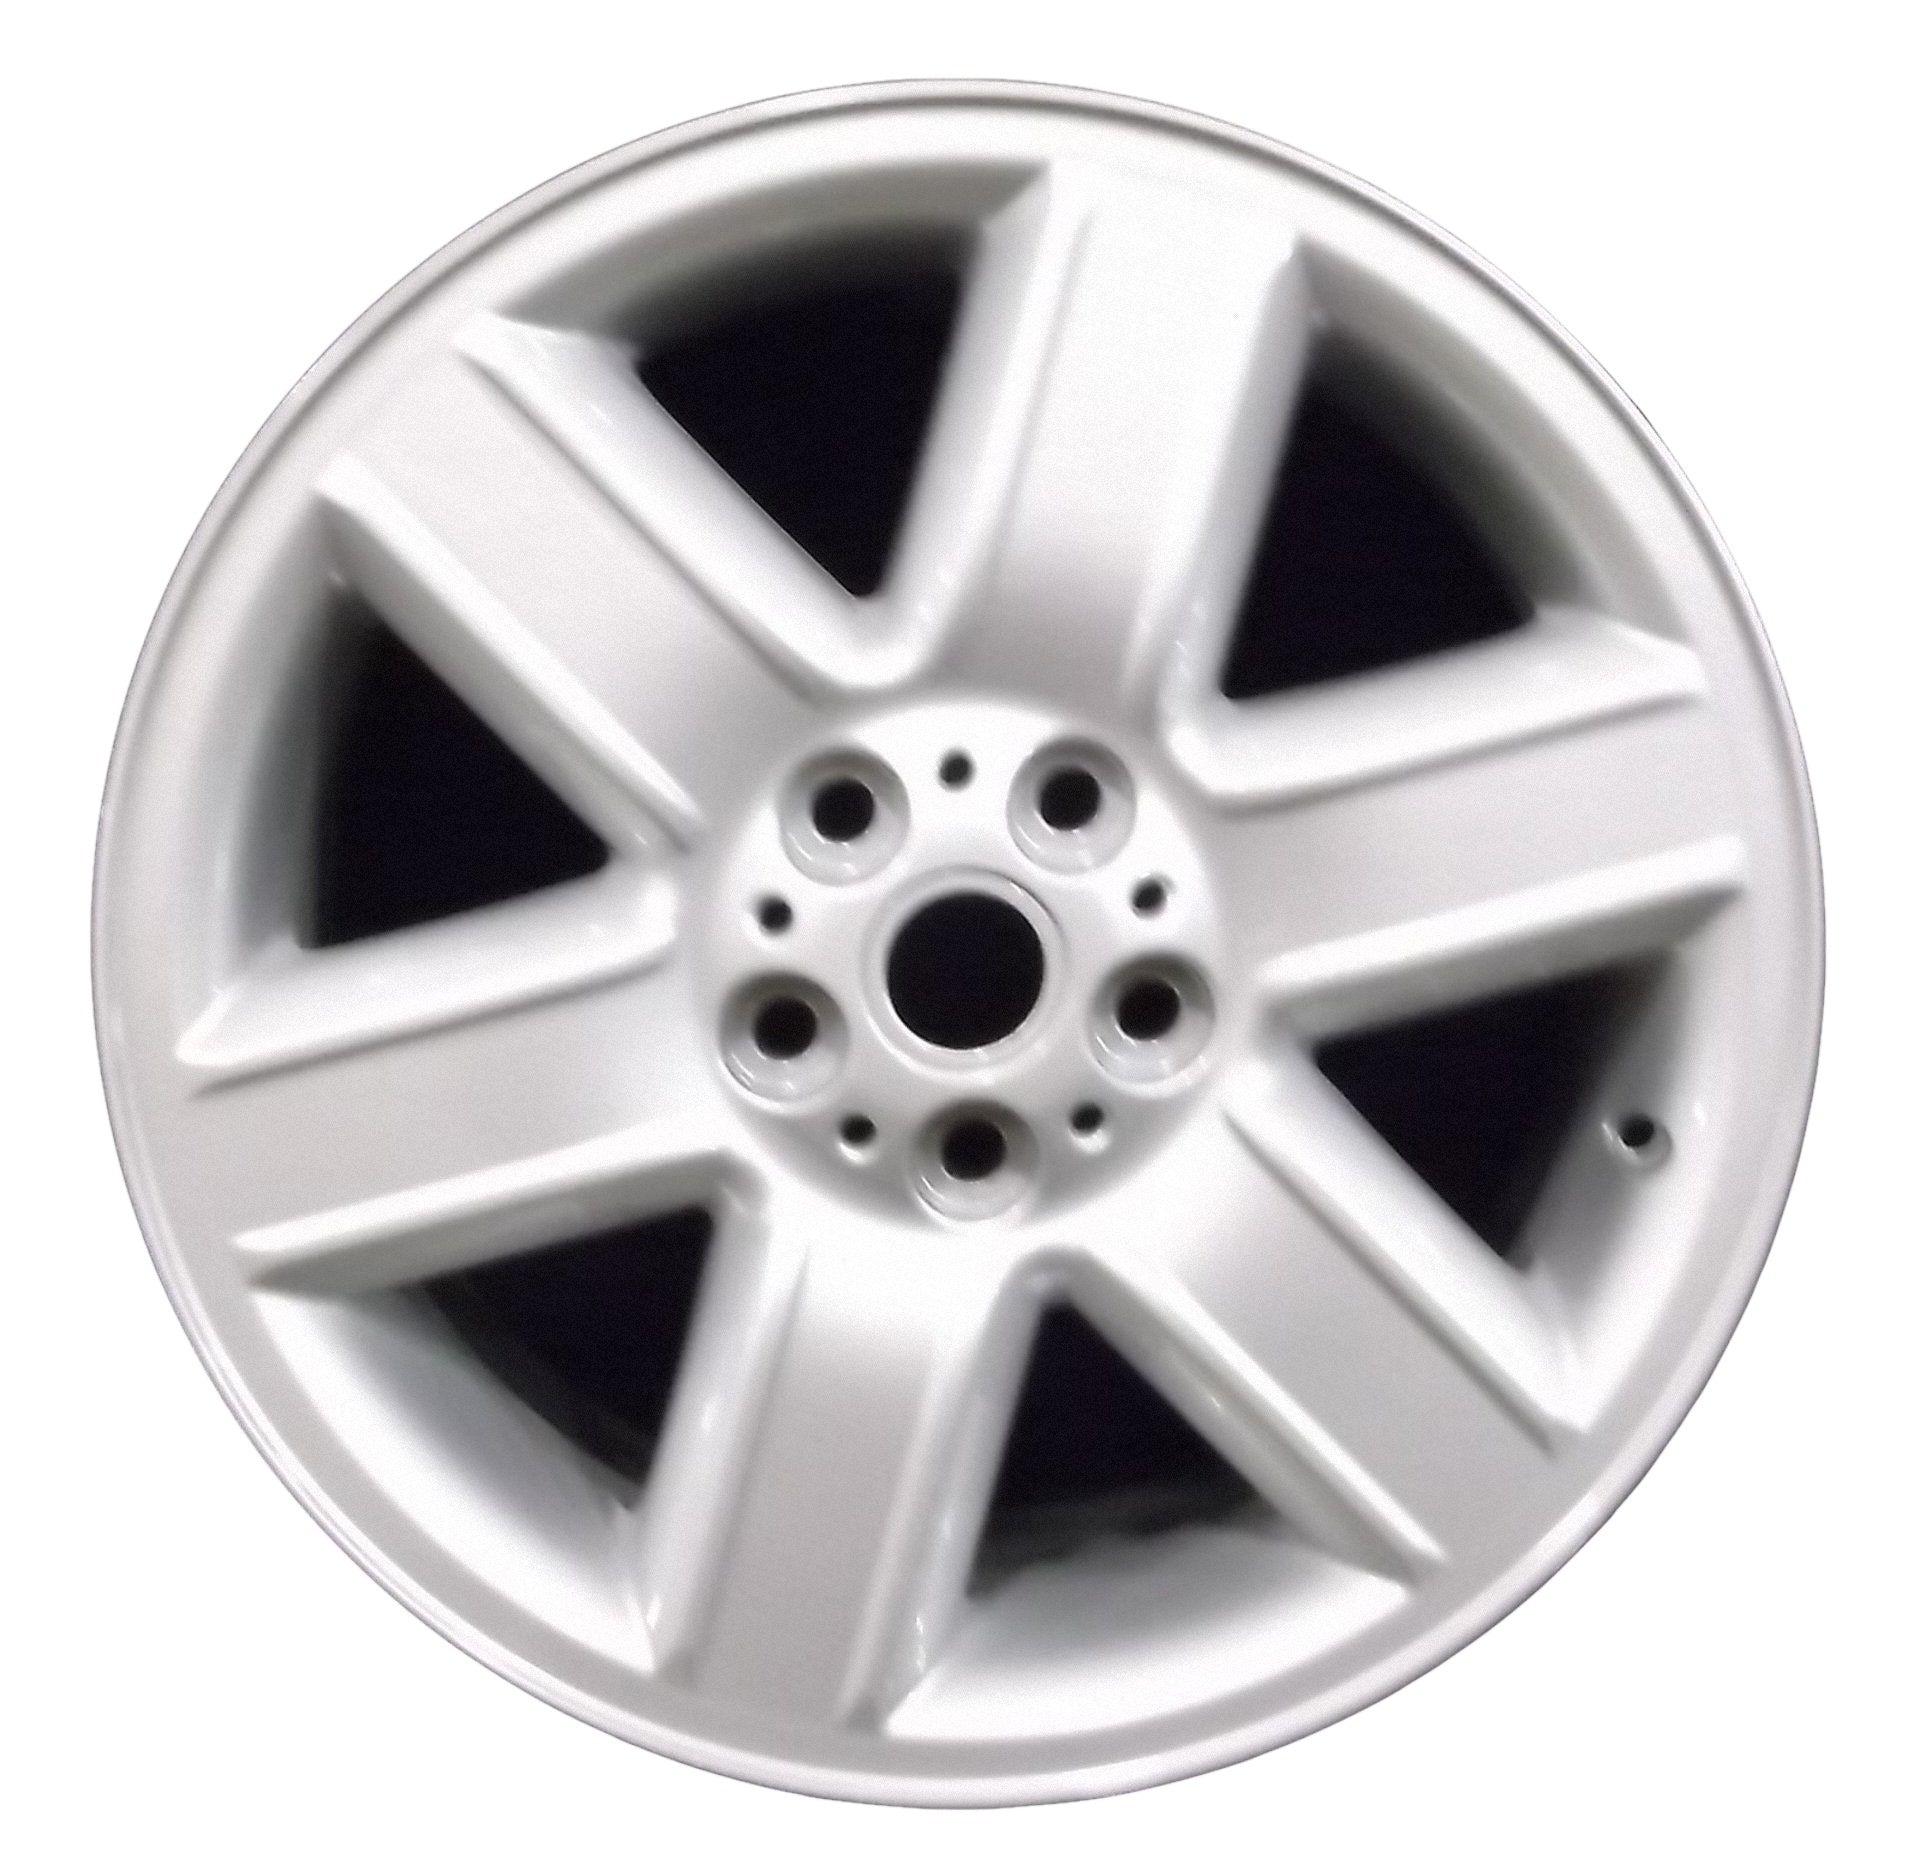 Land Rover Range Rover  2002, 2003, 2004, 2005 Factory OEM Car Wheel Size 19x8 Alloy WAO.72173.PS14.FF